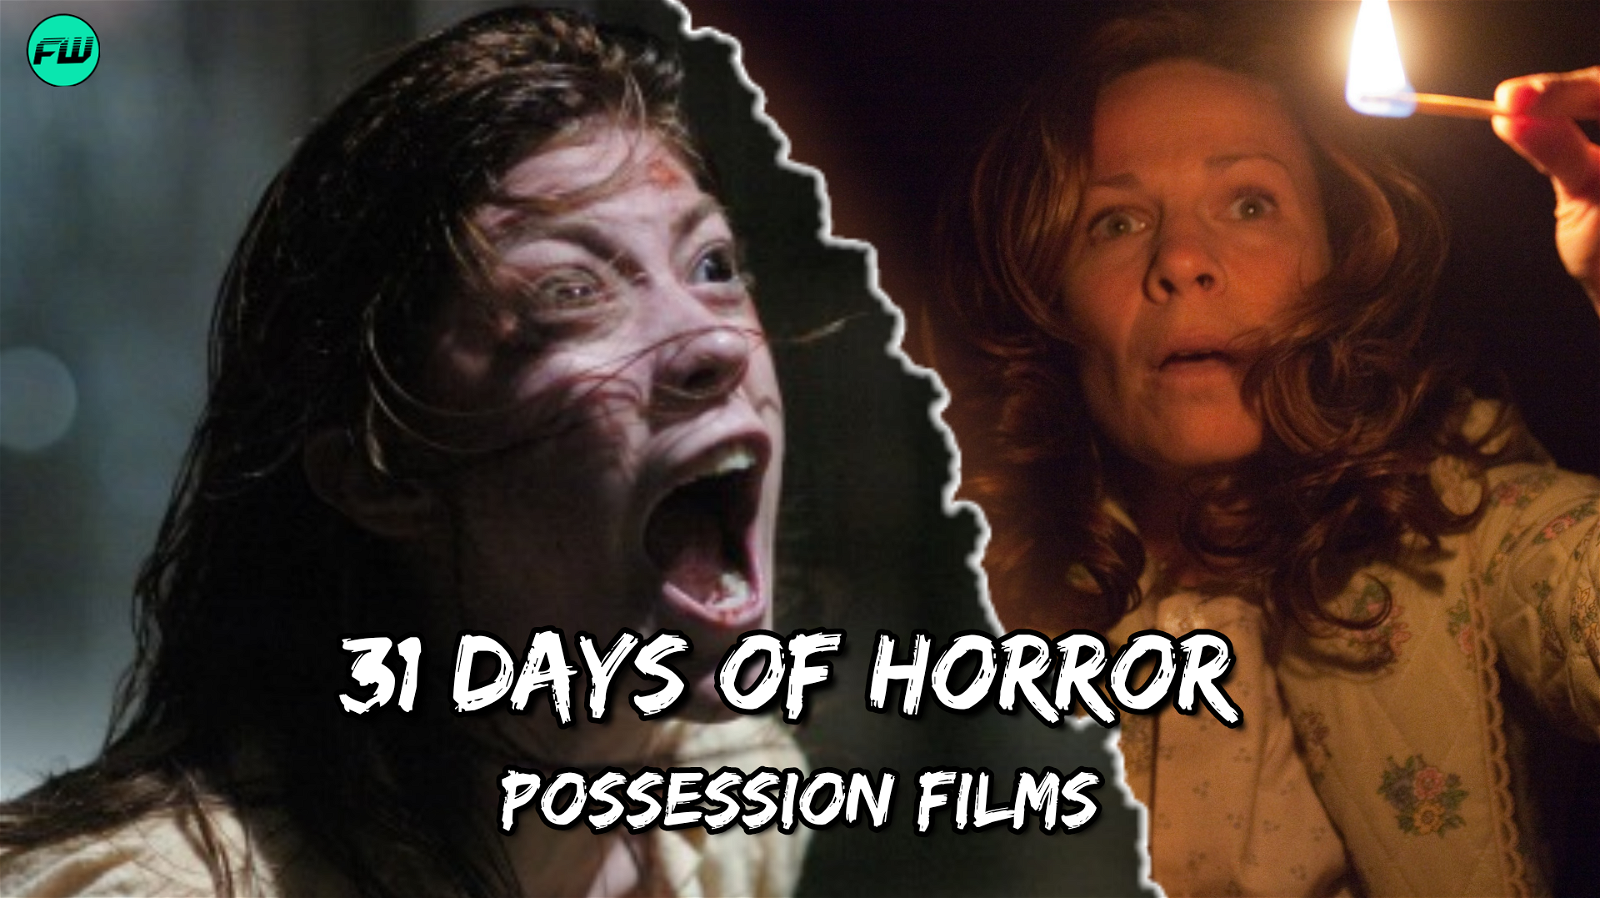 31 Days of Horror: 7 Scary Possession Films You’ll Wish You’d Never Watched